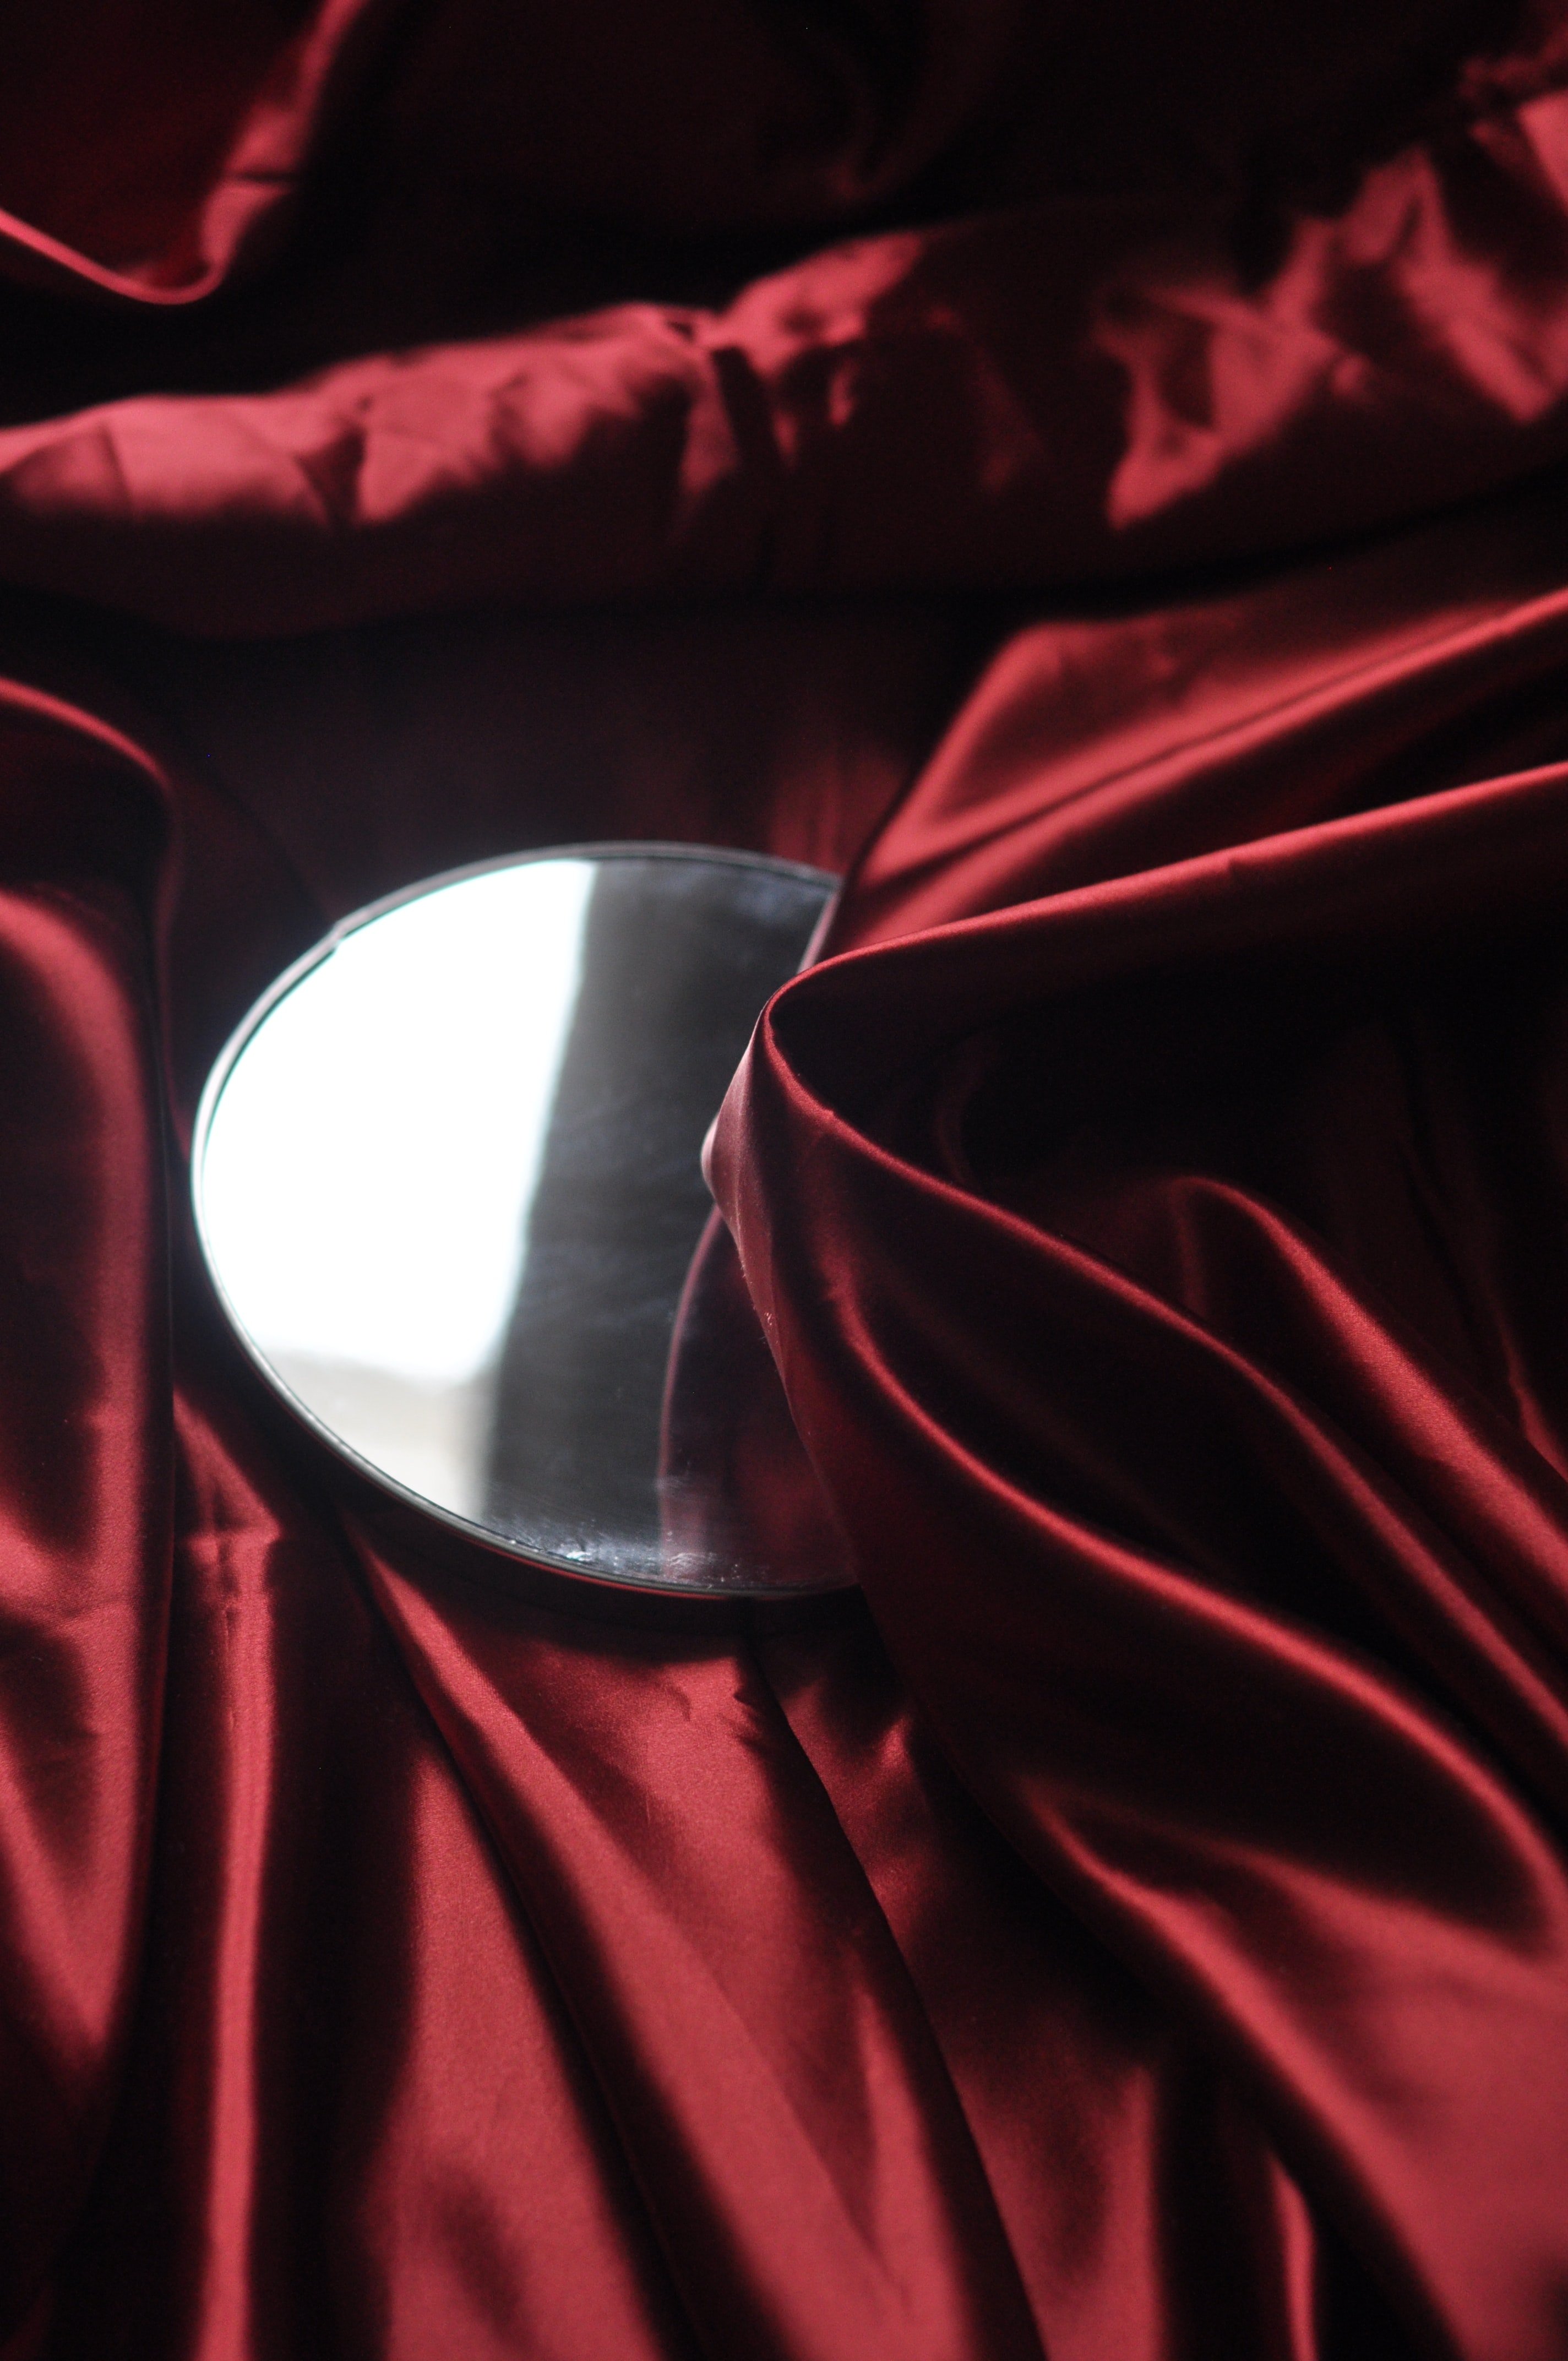 A mirror on top of some red silk | Photo: Unsplash